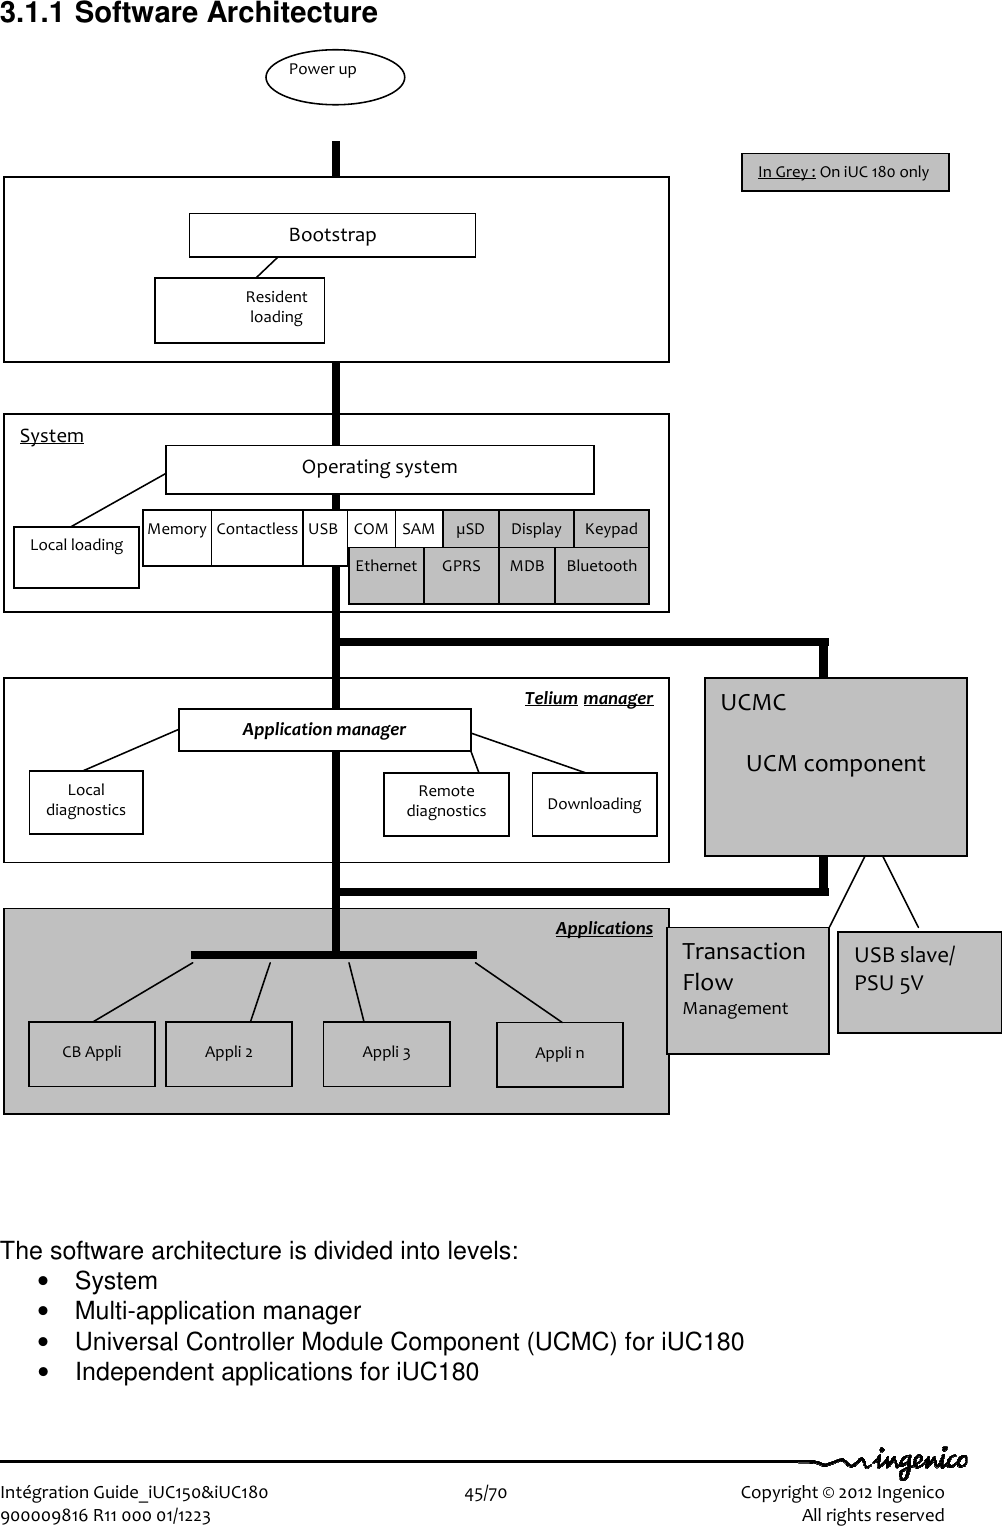   Intégration Guide_iUC150&amp;iUC180                        45/70    Copyright © 2012 Ingenico 900009816 R11 000 01/1223    All rights reserved 3.1.1 Software Architecture                                           The software architecture is divided into levels:  •  System  •  Multi-application manager •  Universal Controller Module Component (UCMC) for iUC180 •  Independent applications for iUC180  Telium manager System  Applications  Resident loading Bootstrap Power up Operating system Local loading Application manager Downloading Remote diagnostics Local  diagnostics Appli 2 CB Appli Appli 3 Appli n UCMC  UCM component Transaction Flow Management USB slave/ PSU 5V Memory µSD SAM Display Keypad USB Contactless COM Ethernet GPRS MDB Bluetooth In Grey : On iUC 180 only 